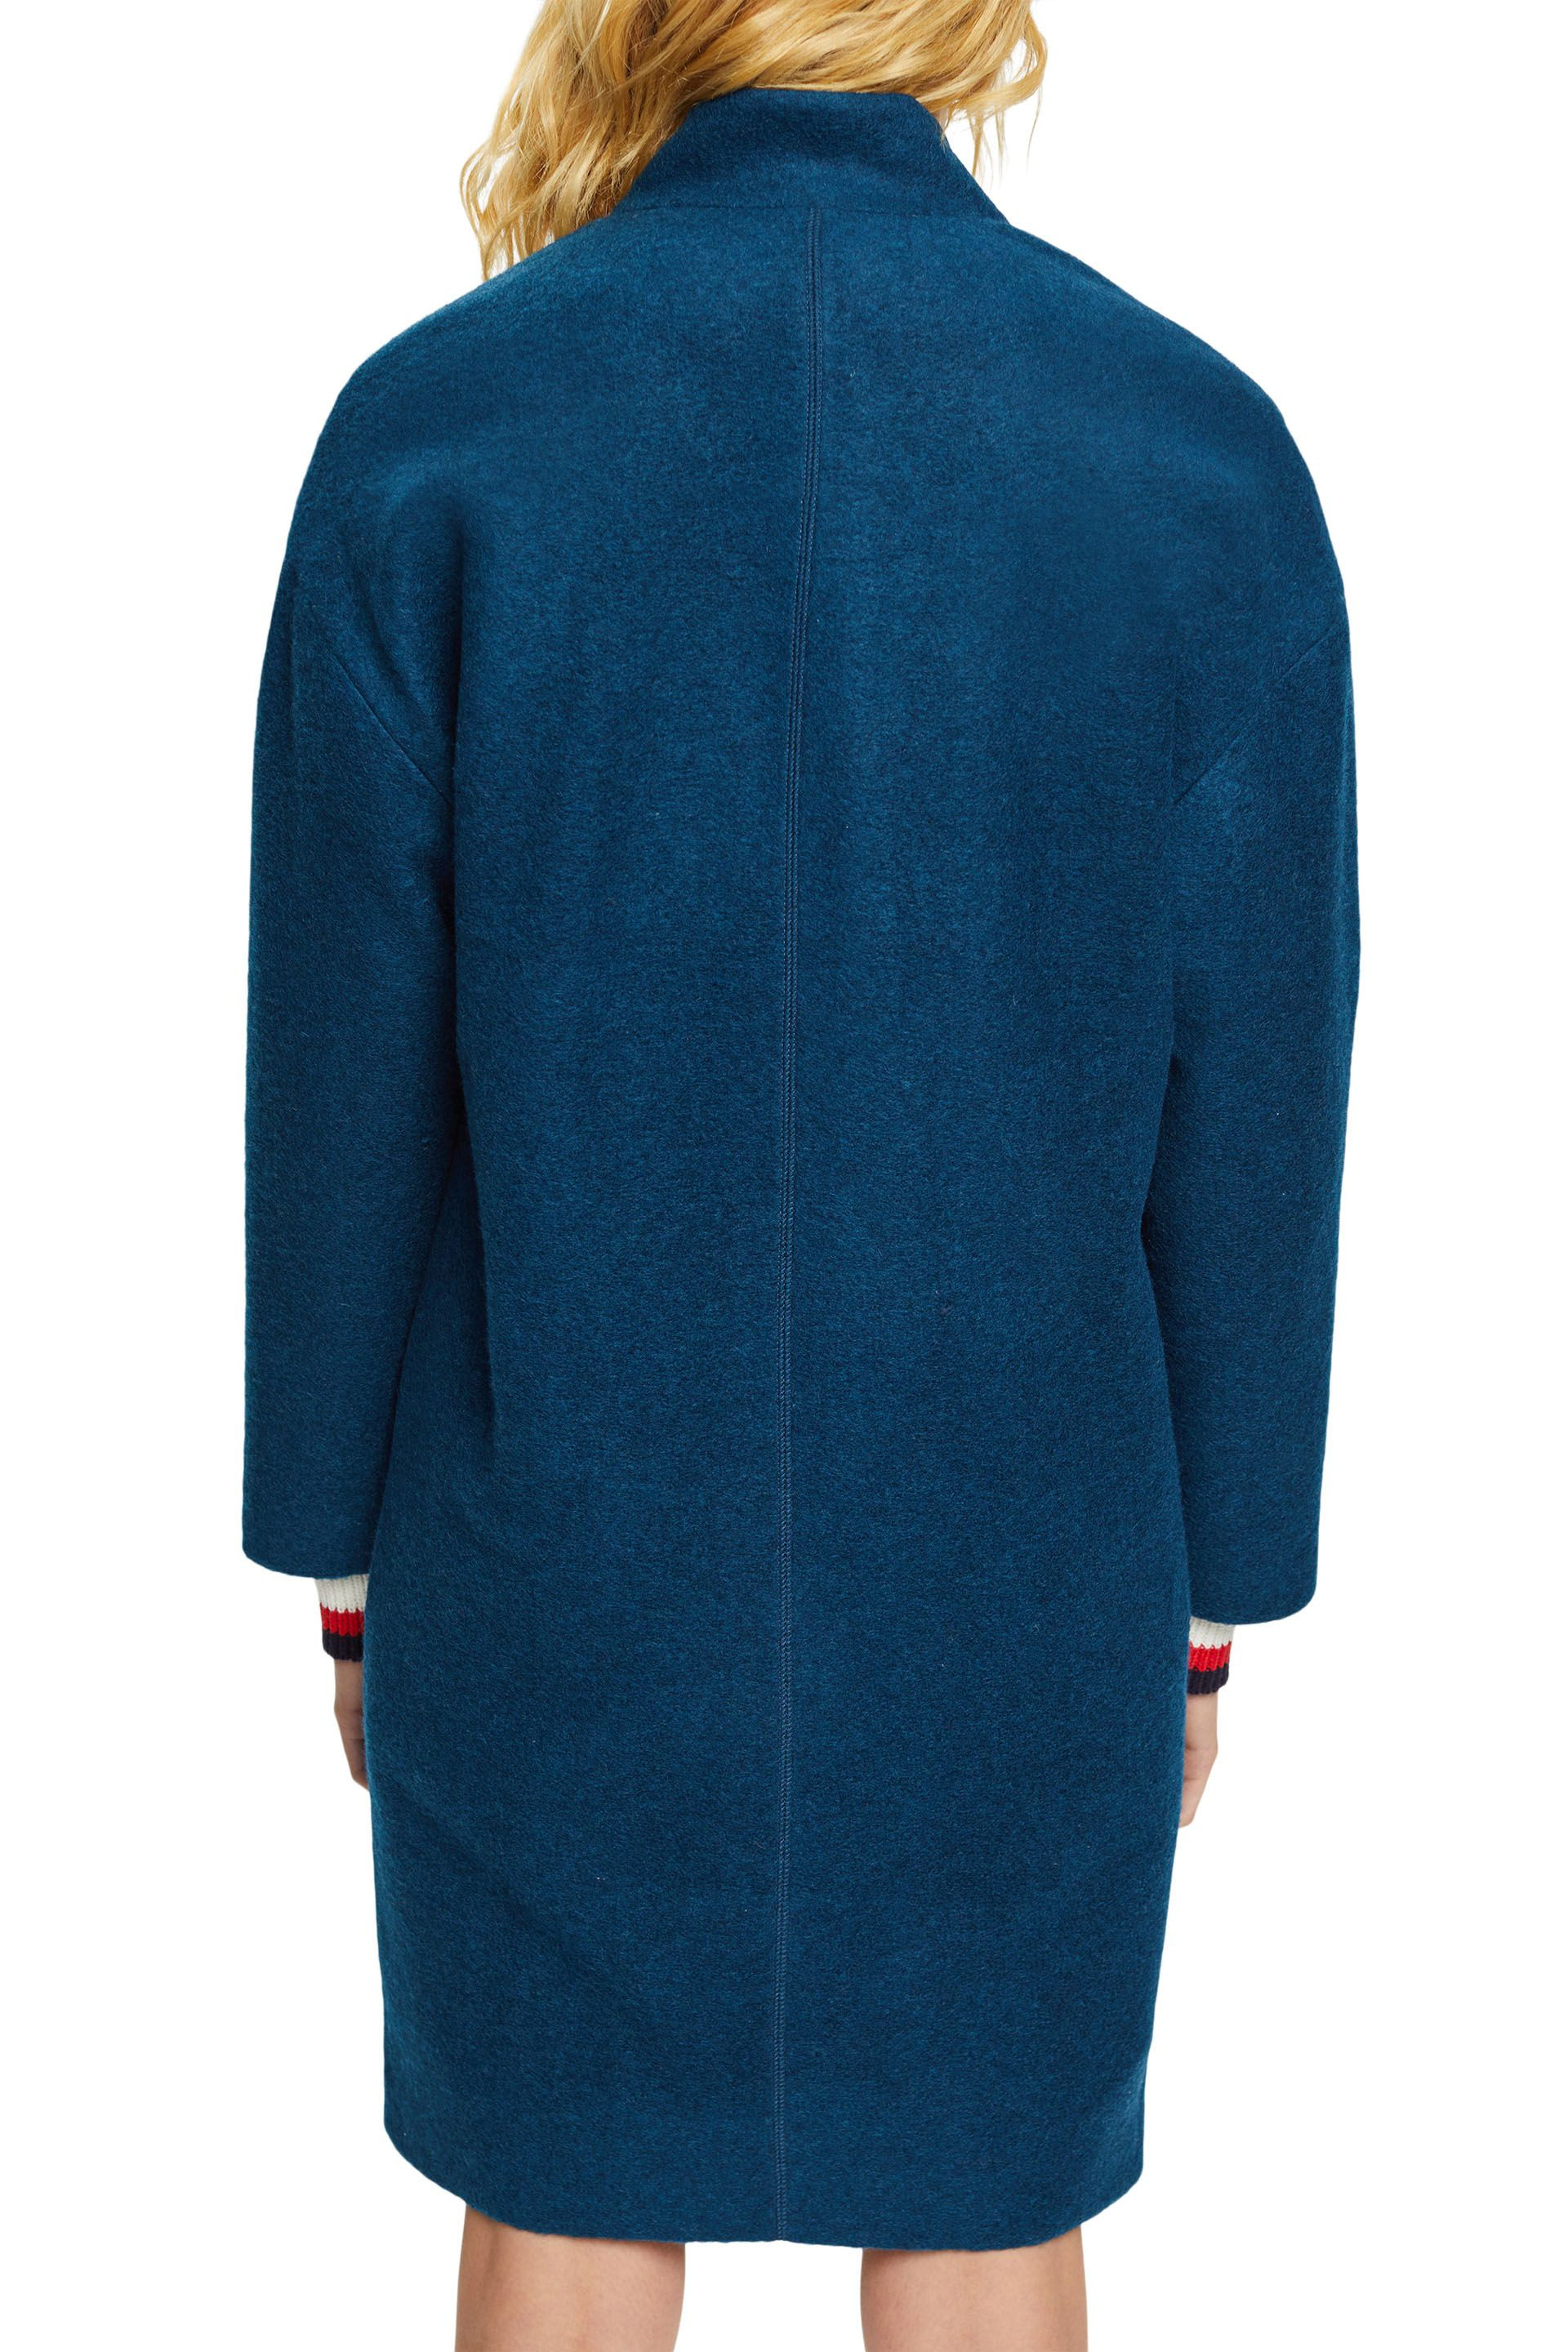 Wool blend coat with lapel collar, Blue, large image number 3